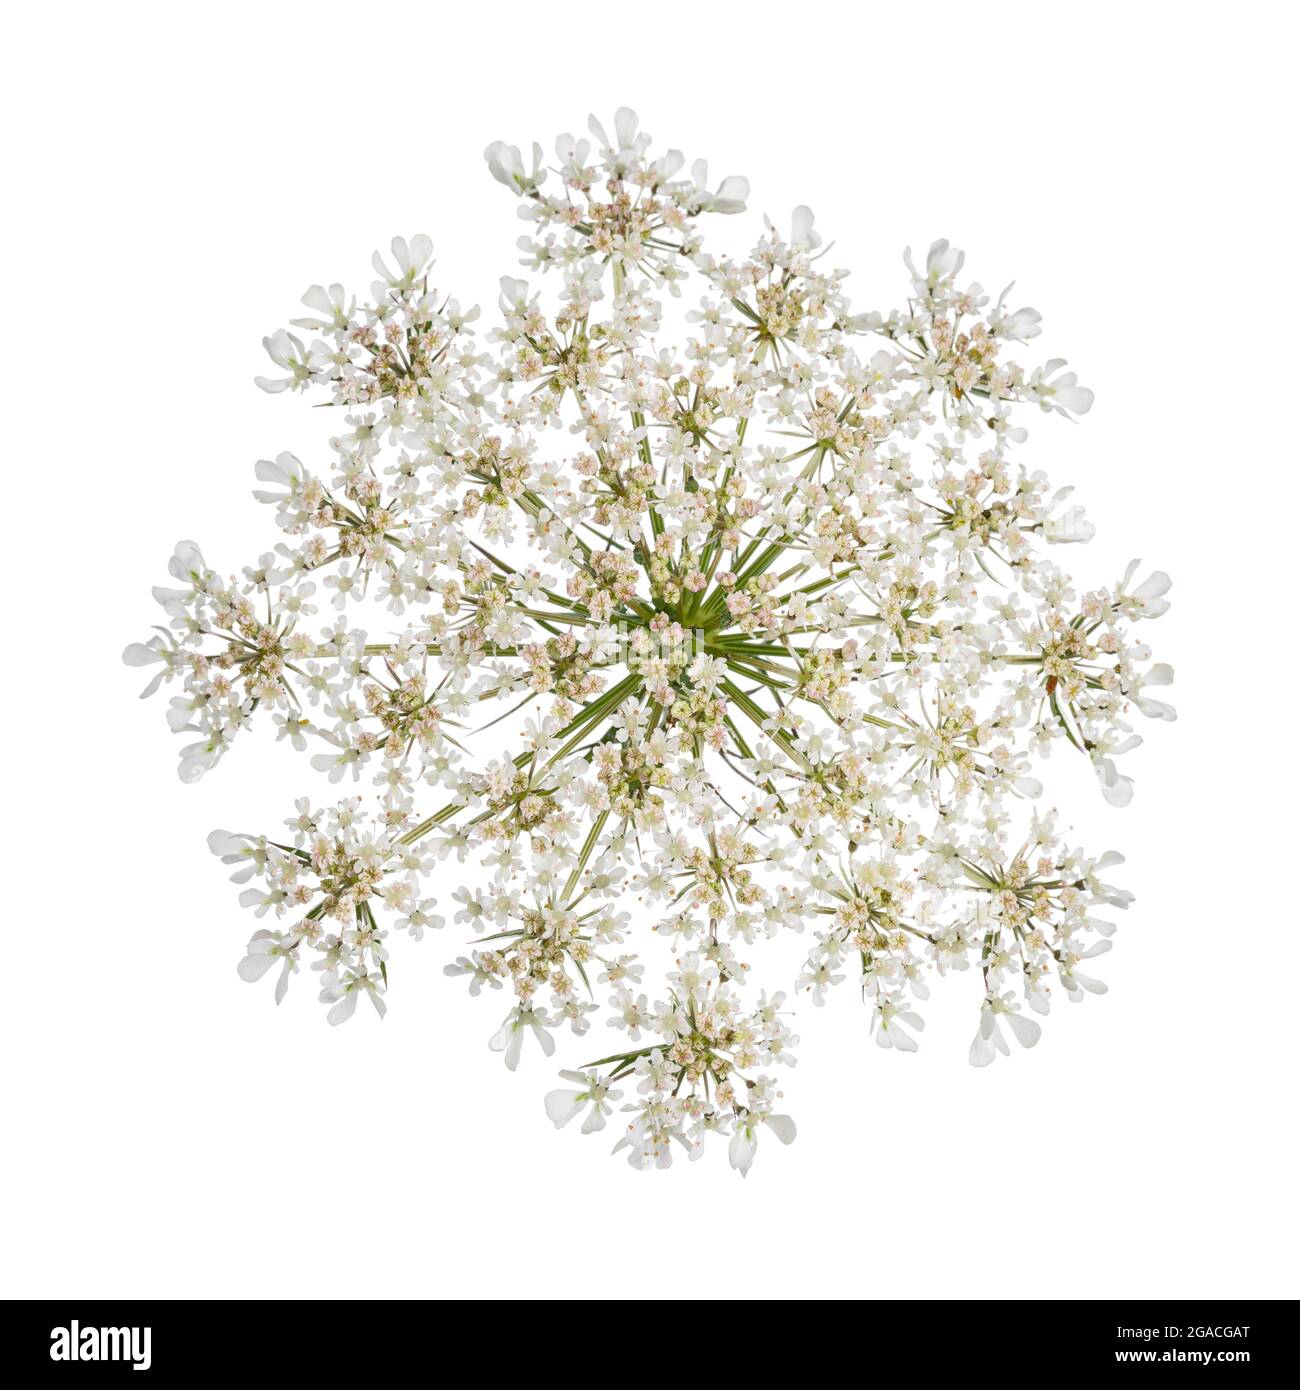 Top view of Queen Anne's Lace aka Daucus carota umbel flower. isolated on white background. Stock Photo